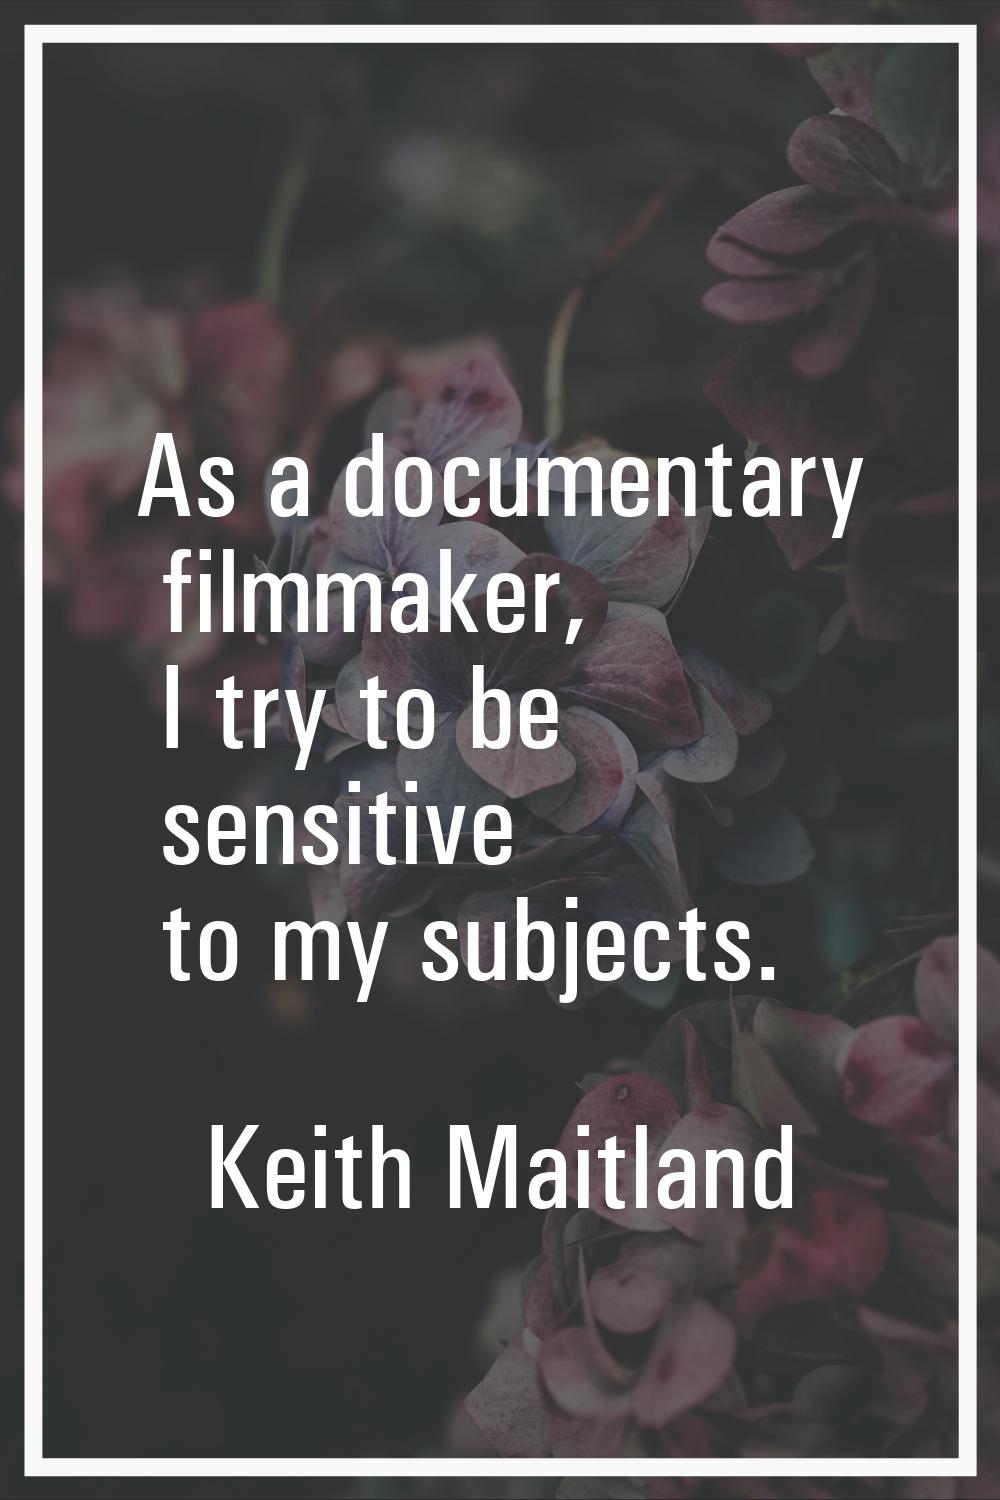 As a documentary filmmaker, I try to be sensitive to my subjects.